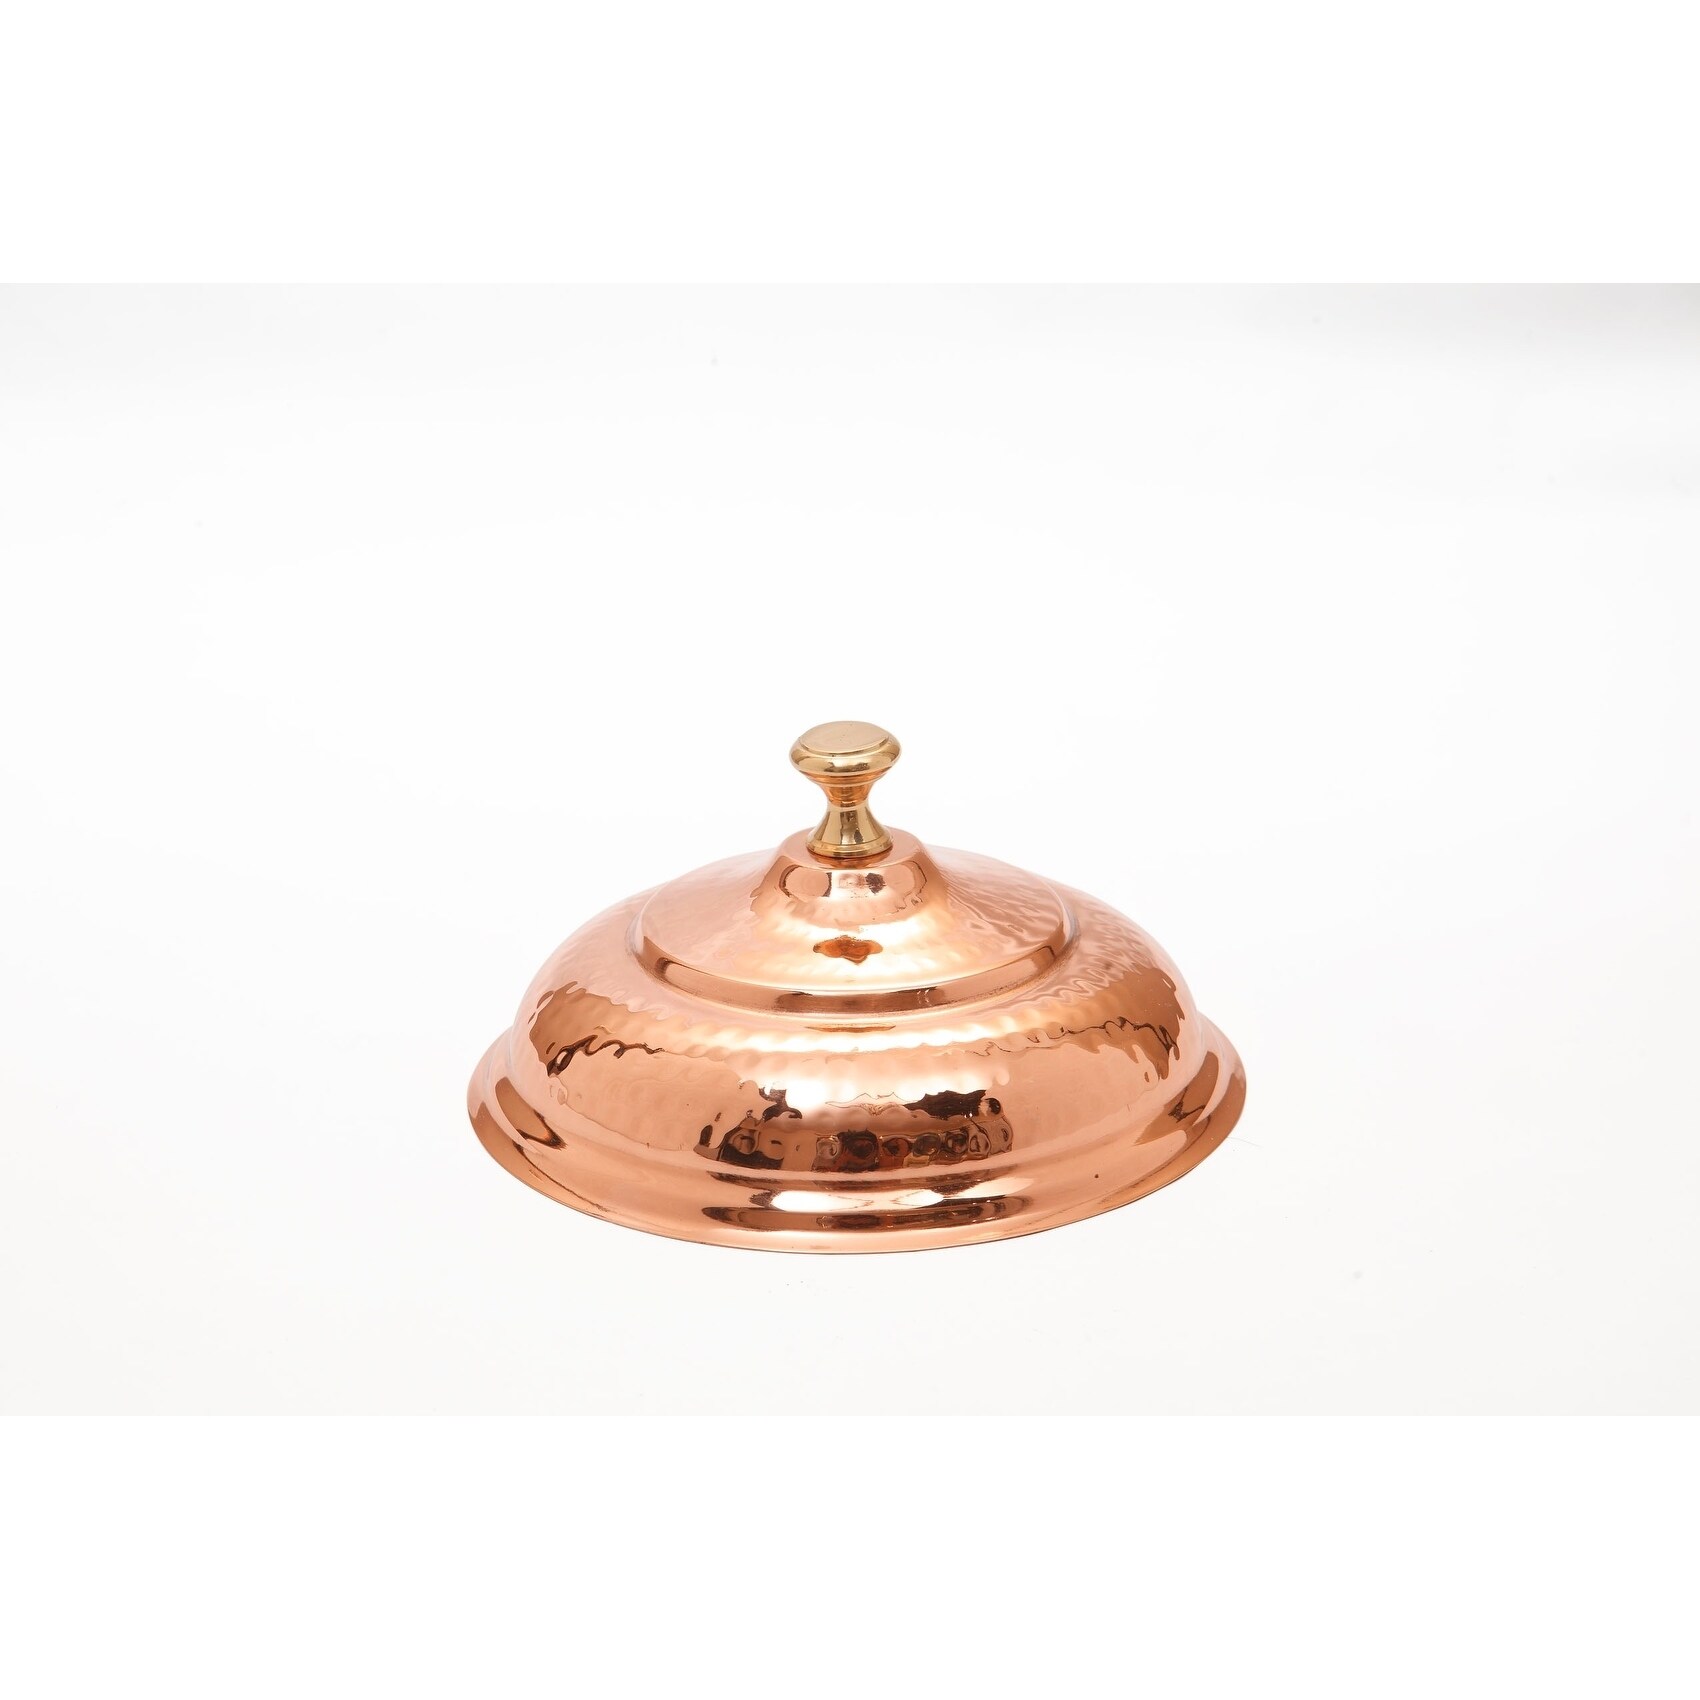 6 Qt Old Dutch Oval Copper-Plated Chafing Dish